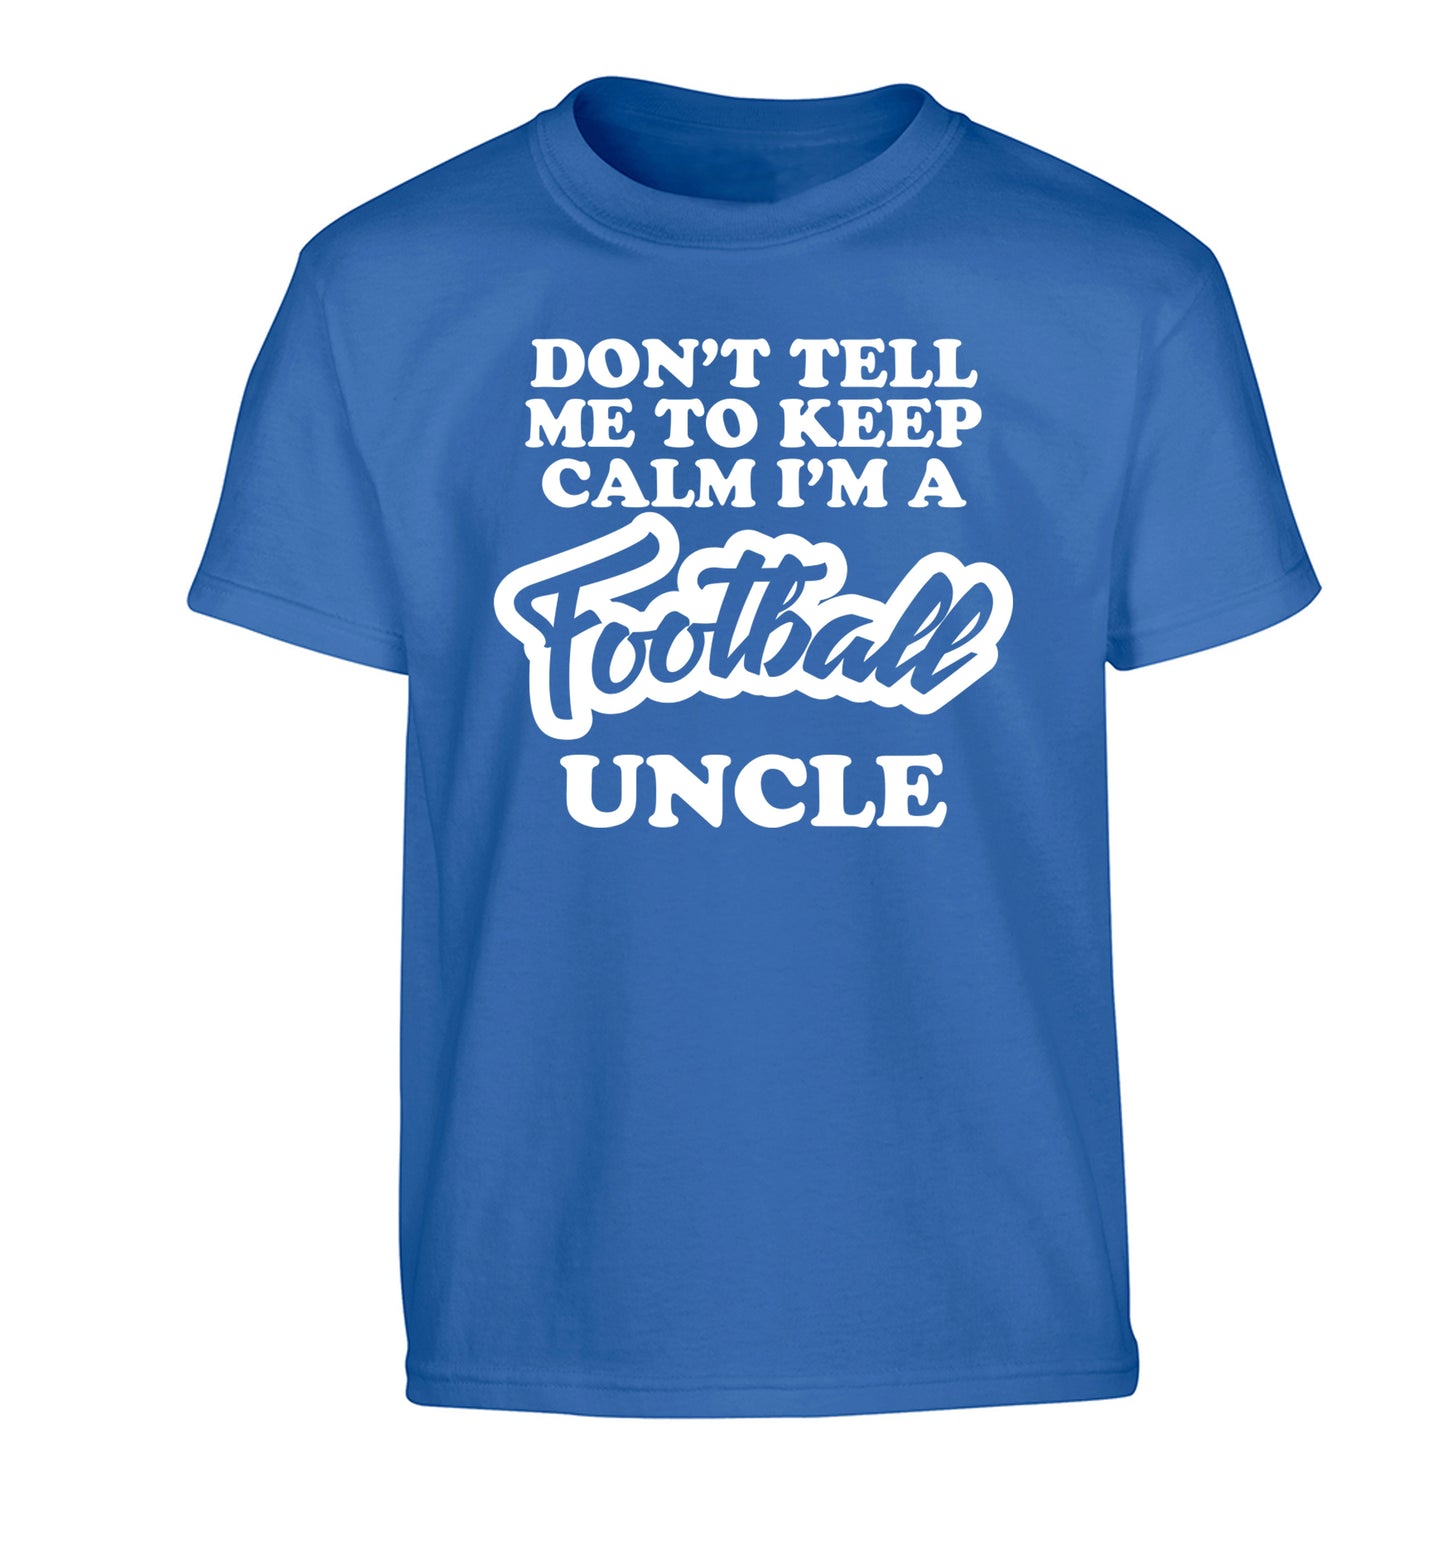 Don't tell me to keep calm I'm a football uncle Children's blue Tshirt 12-14 Years